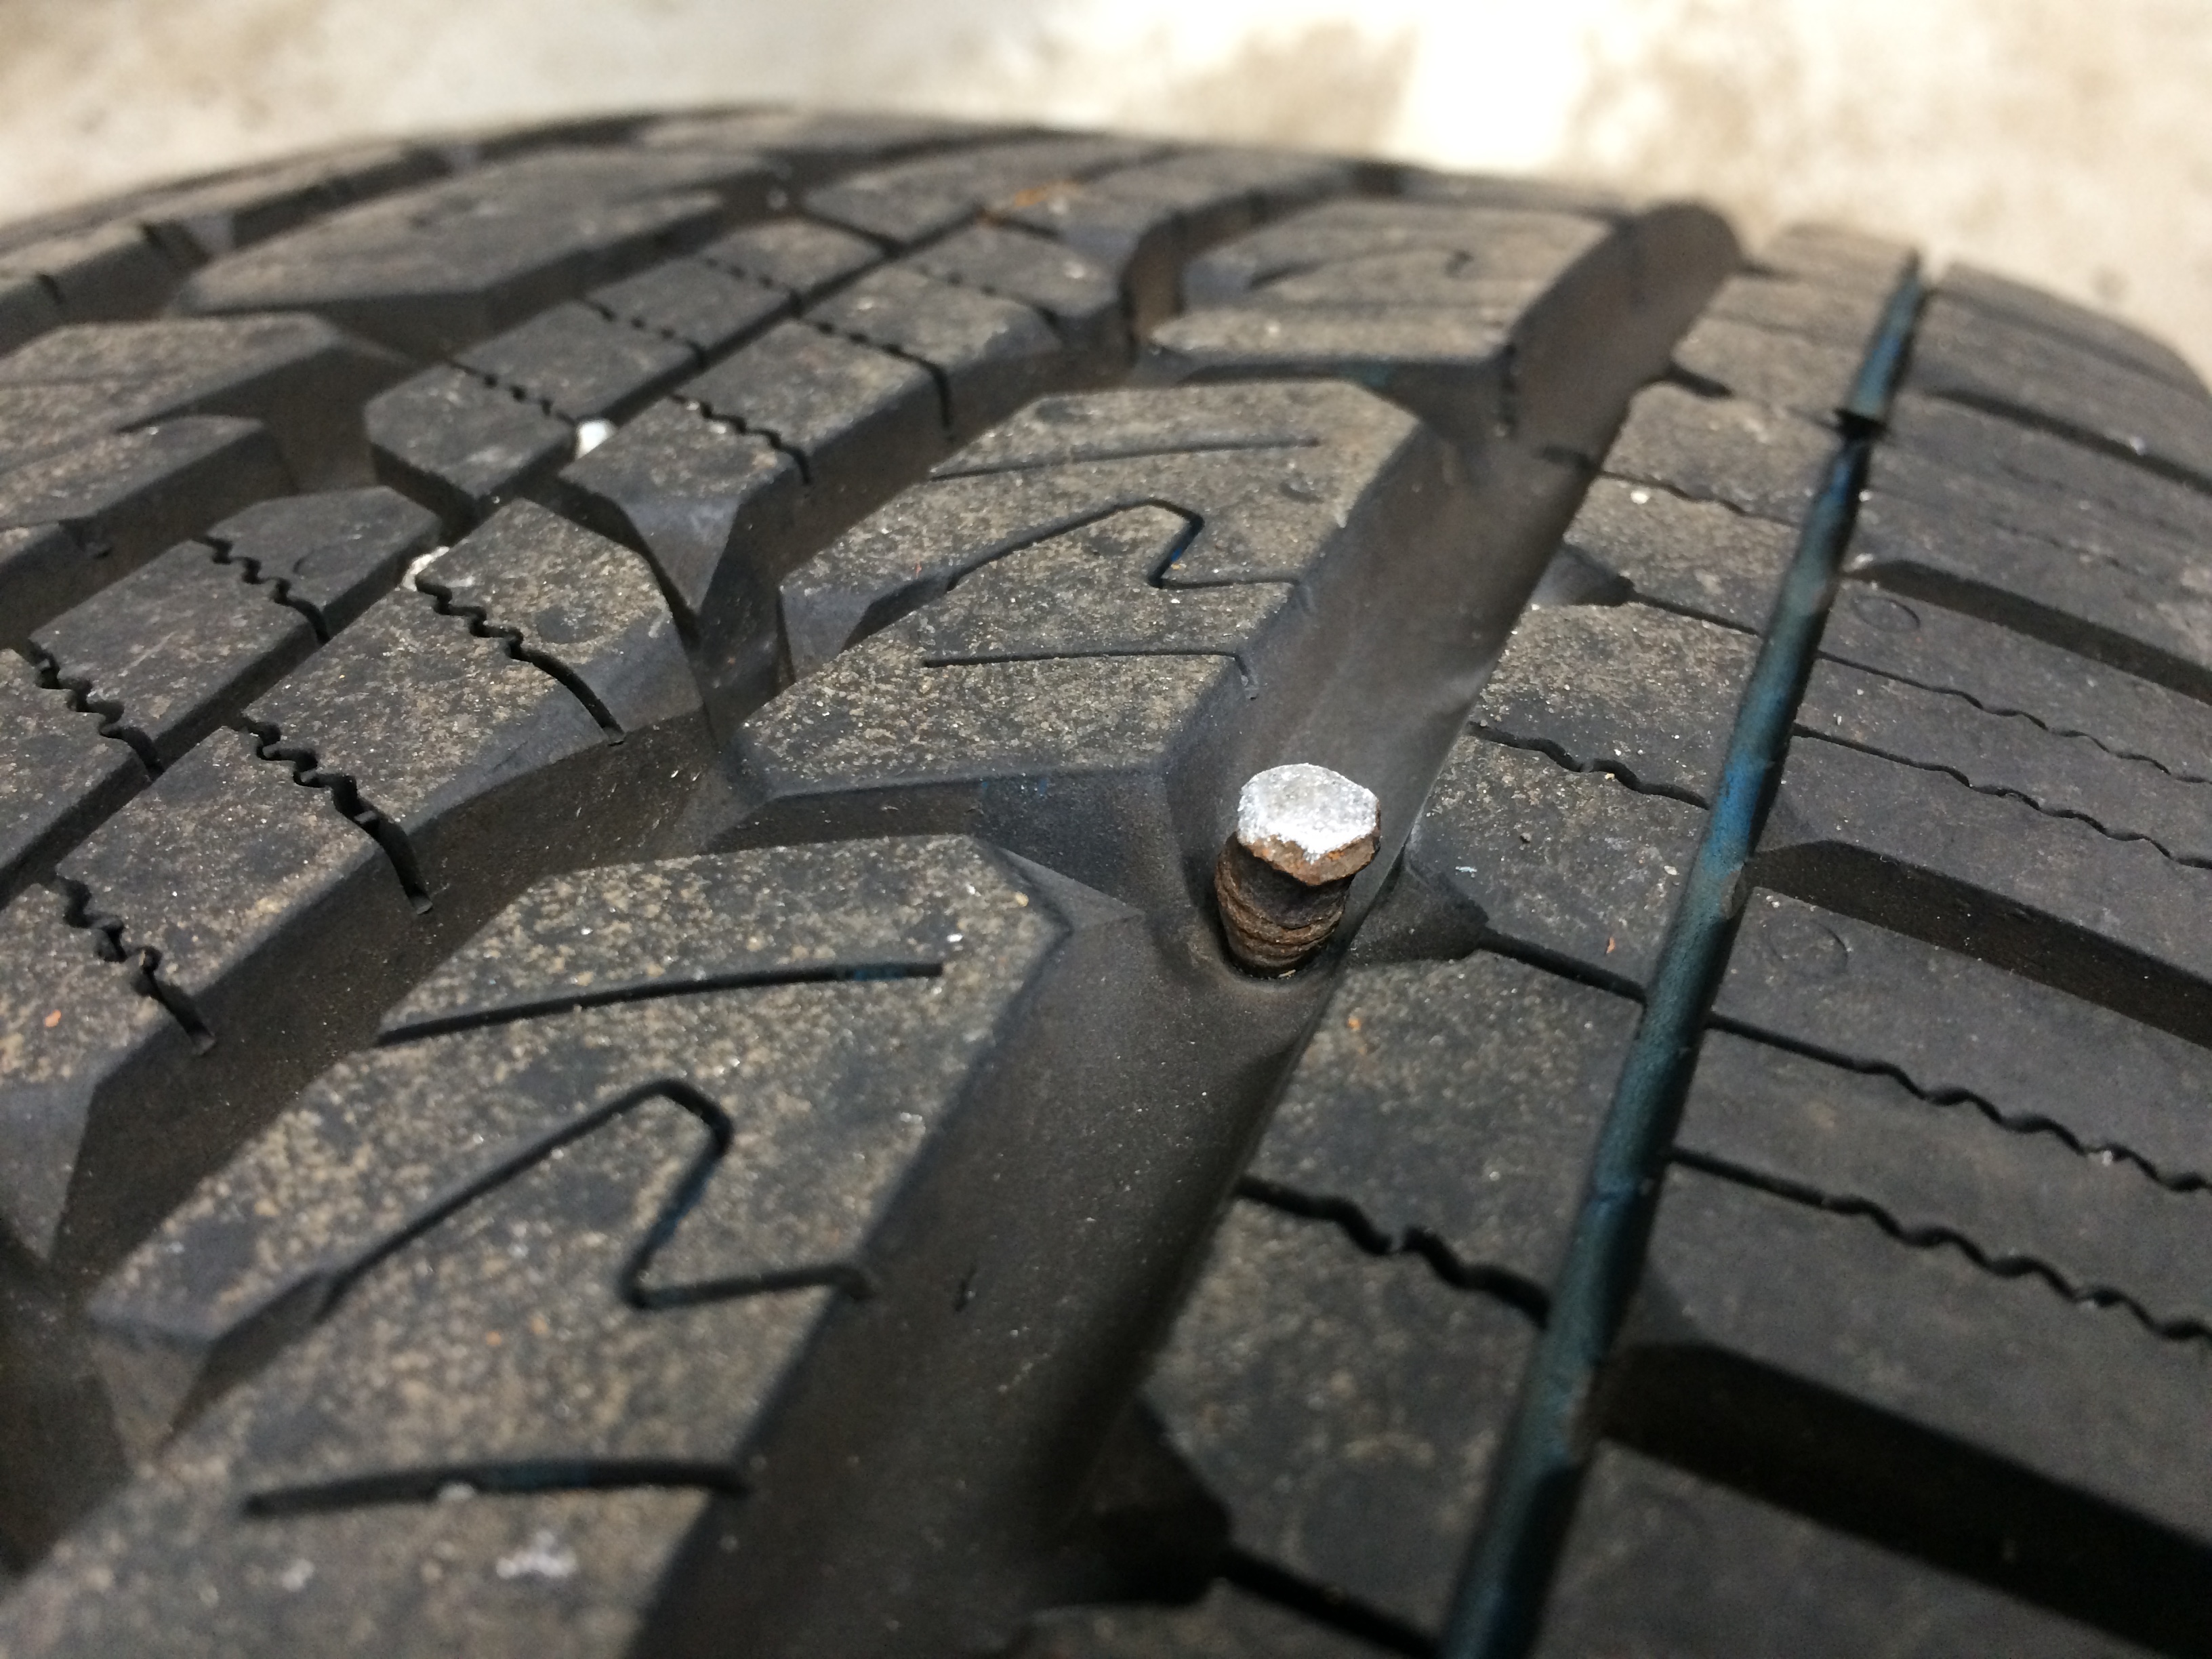 How To Fix A Tire Leak Plug or Patch? See How We Repair a Slow Leaking Tire - Auto Repair Shop  Blog | Kenwood Tire Company, West Bridgewater, MA